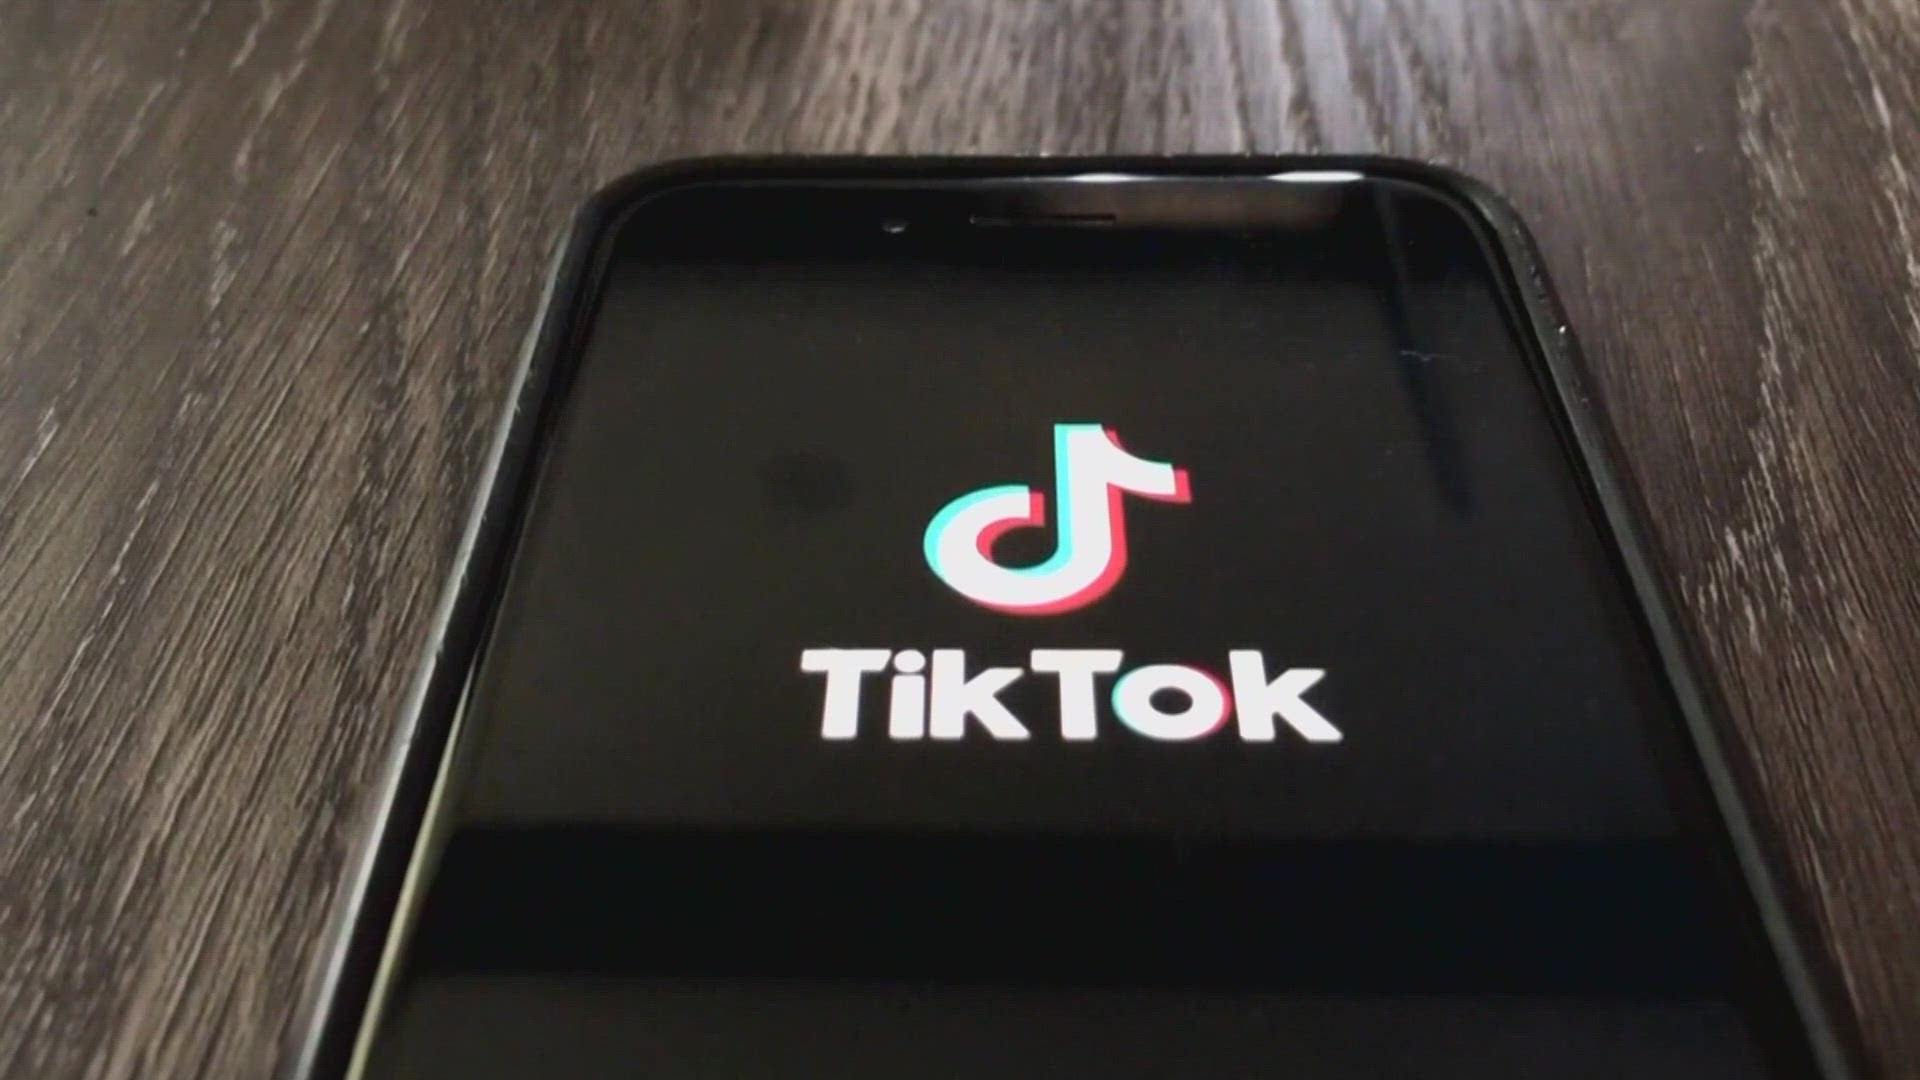 New TikTok ban is poised to advance in Congress